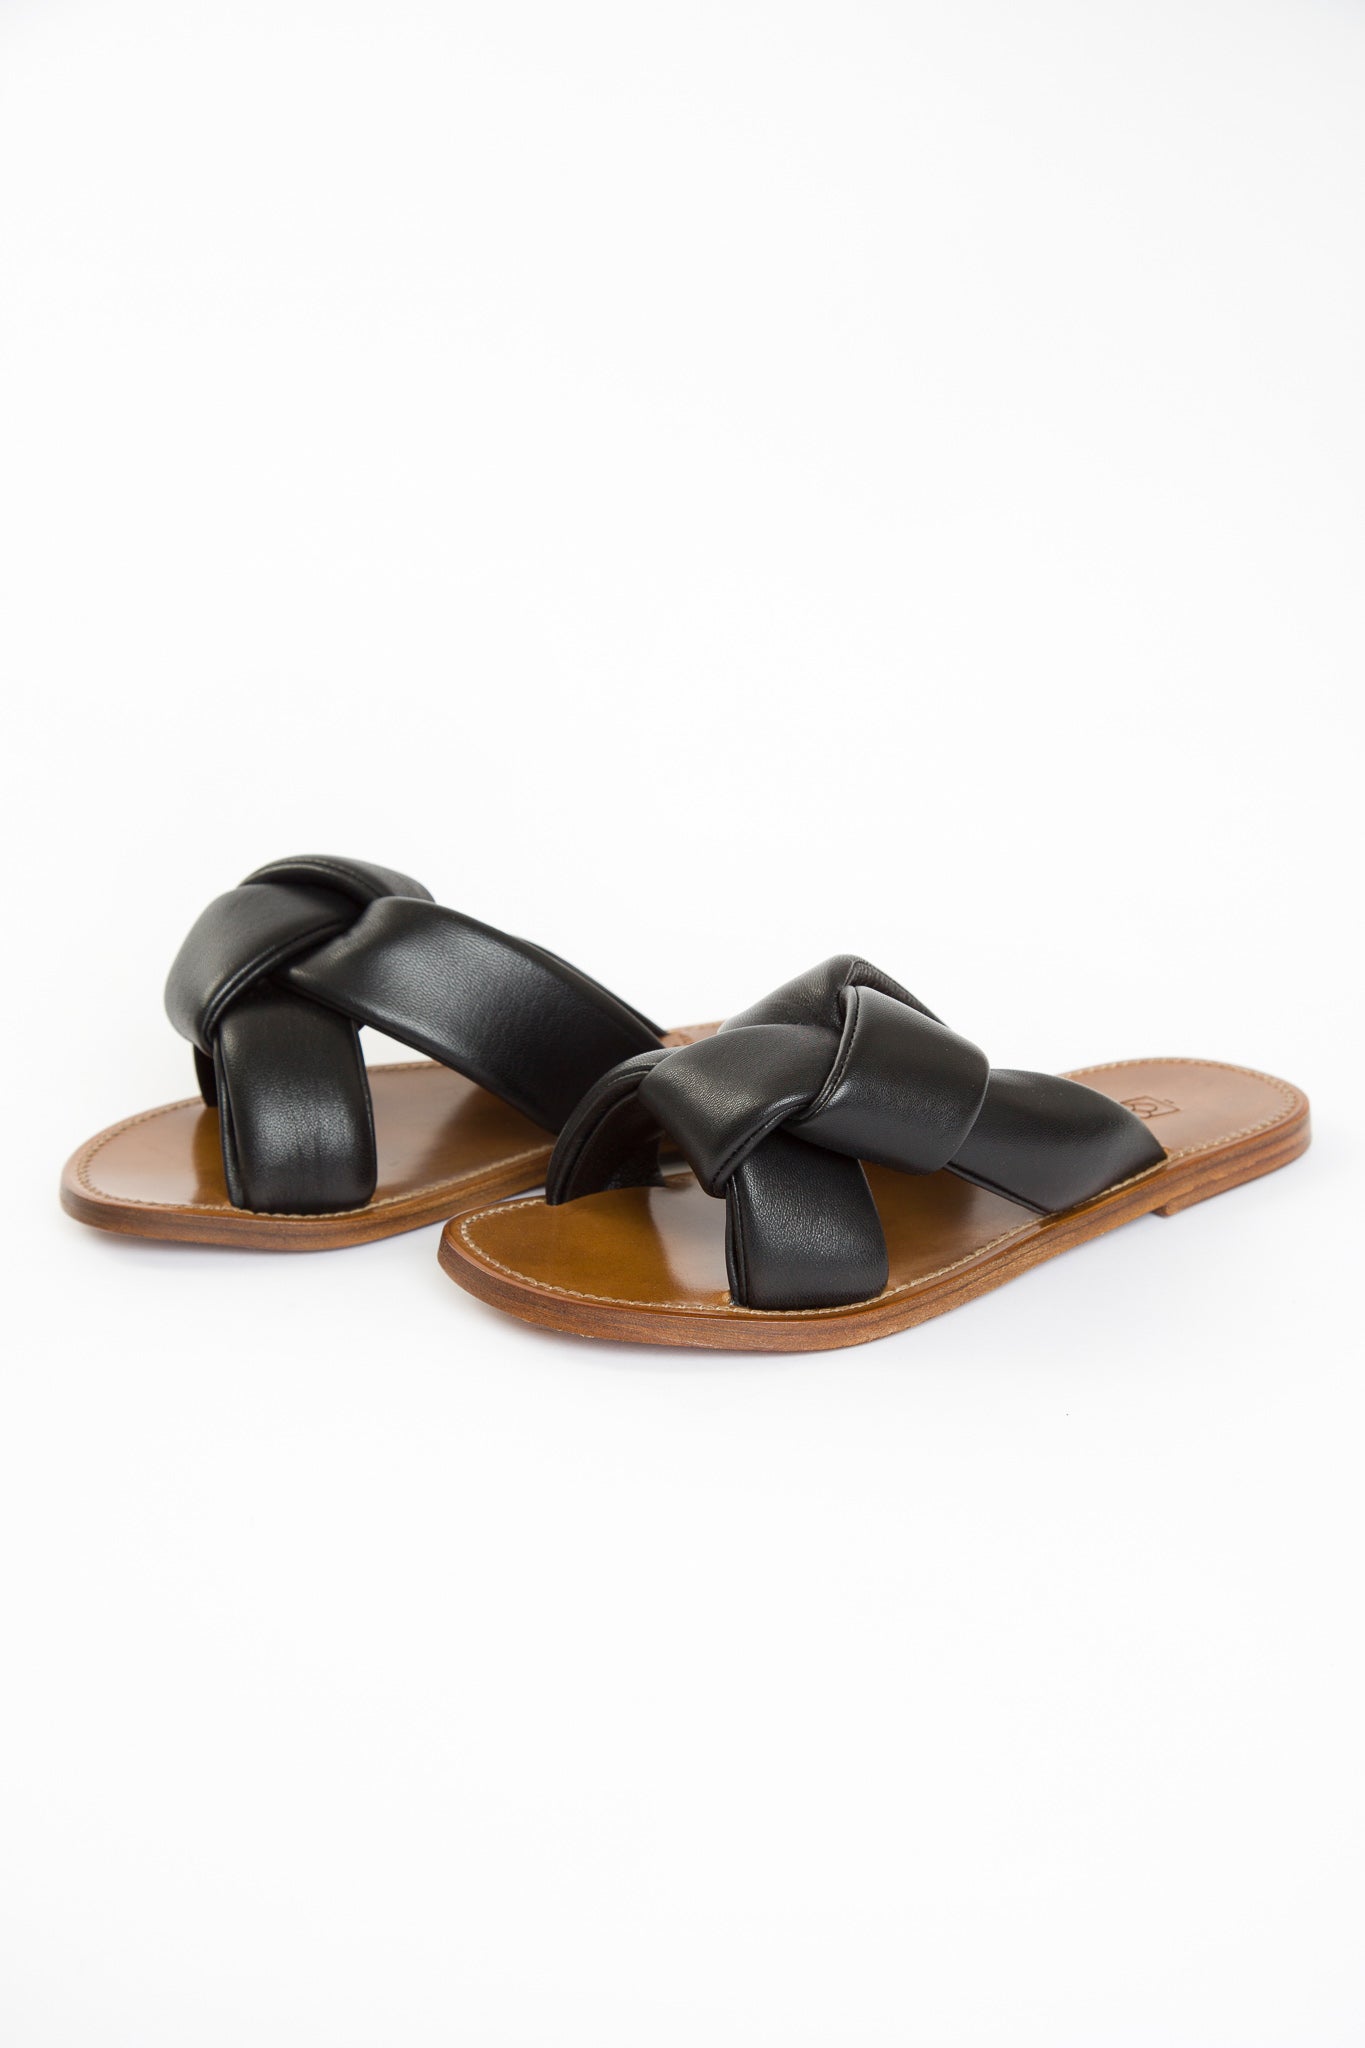 KNOTTED SANDAL IN ITALIAN LEATHER - Jarbo